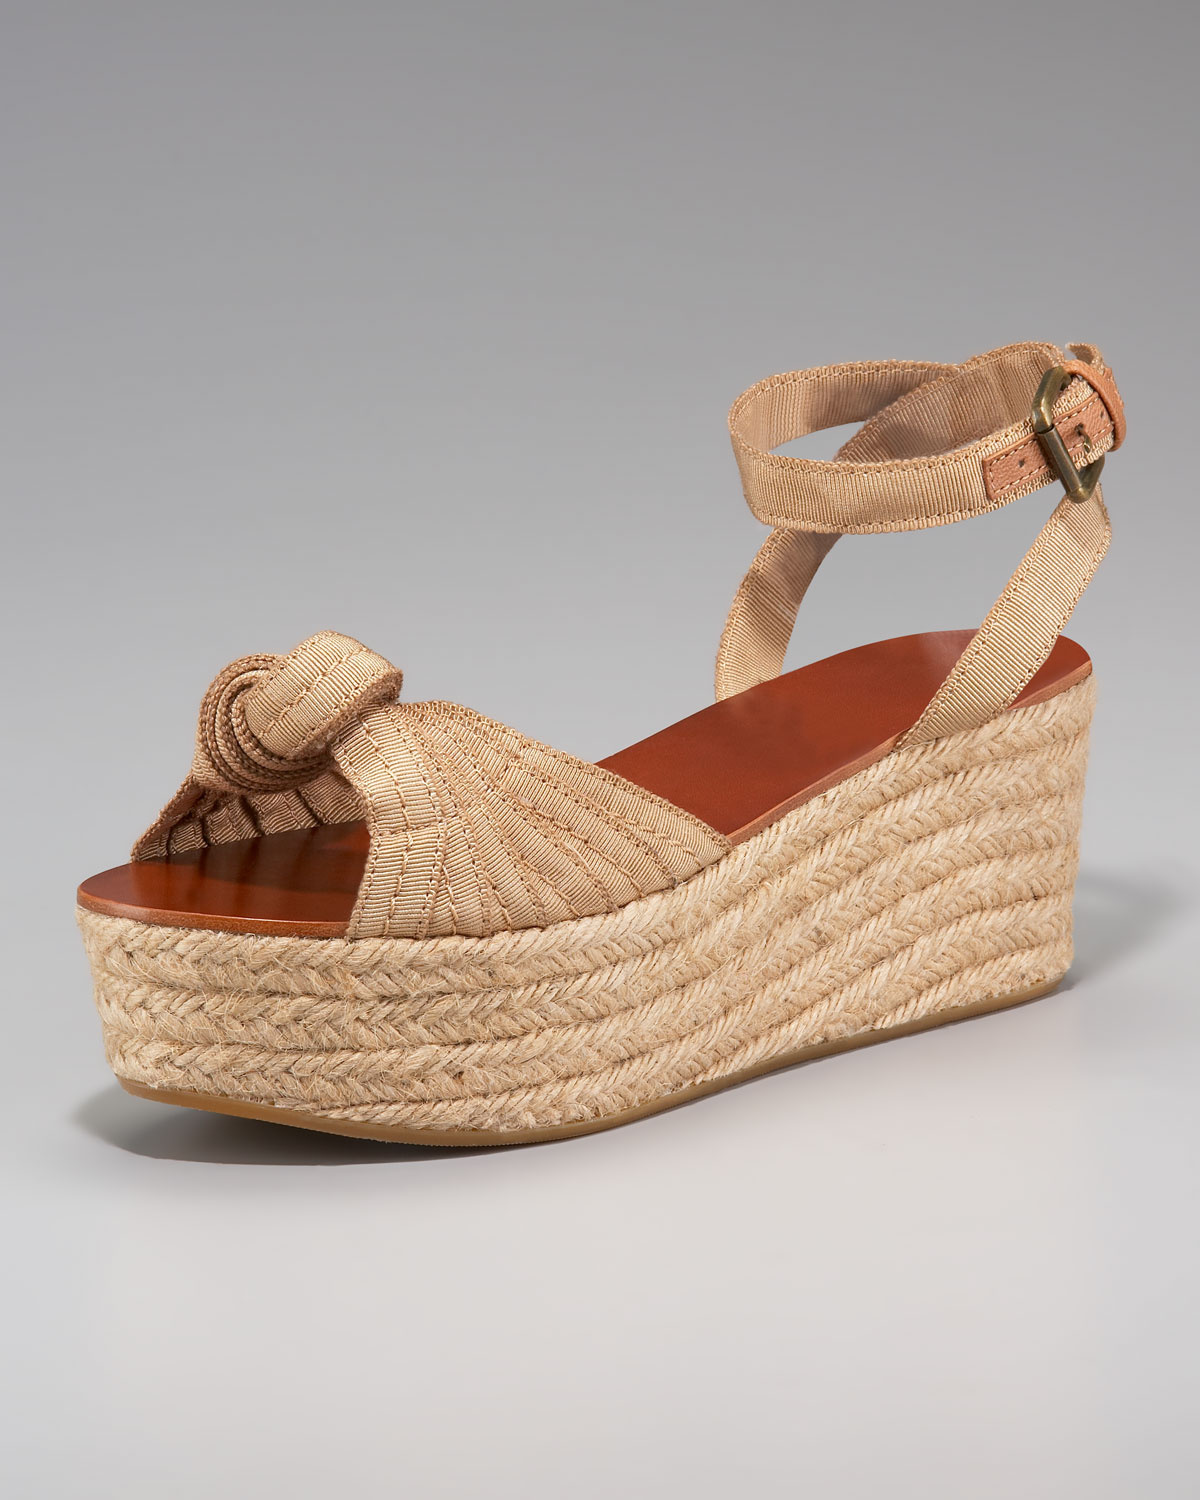 Joie Ribbon Espadrille Wedge Sandal in Natural | Lyst